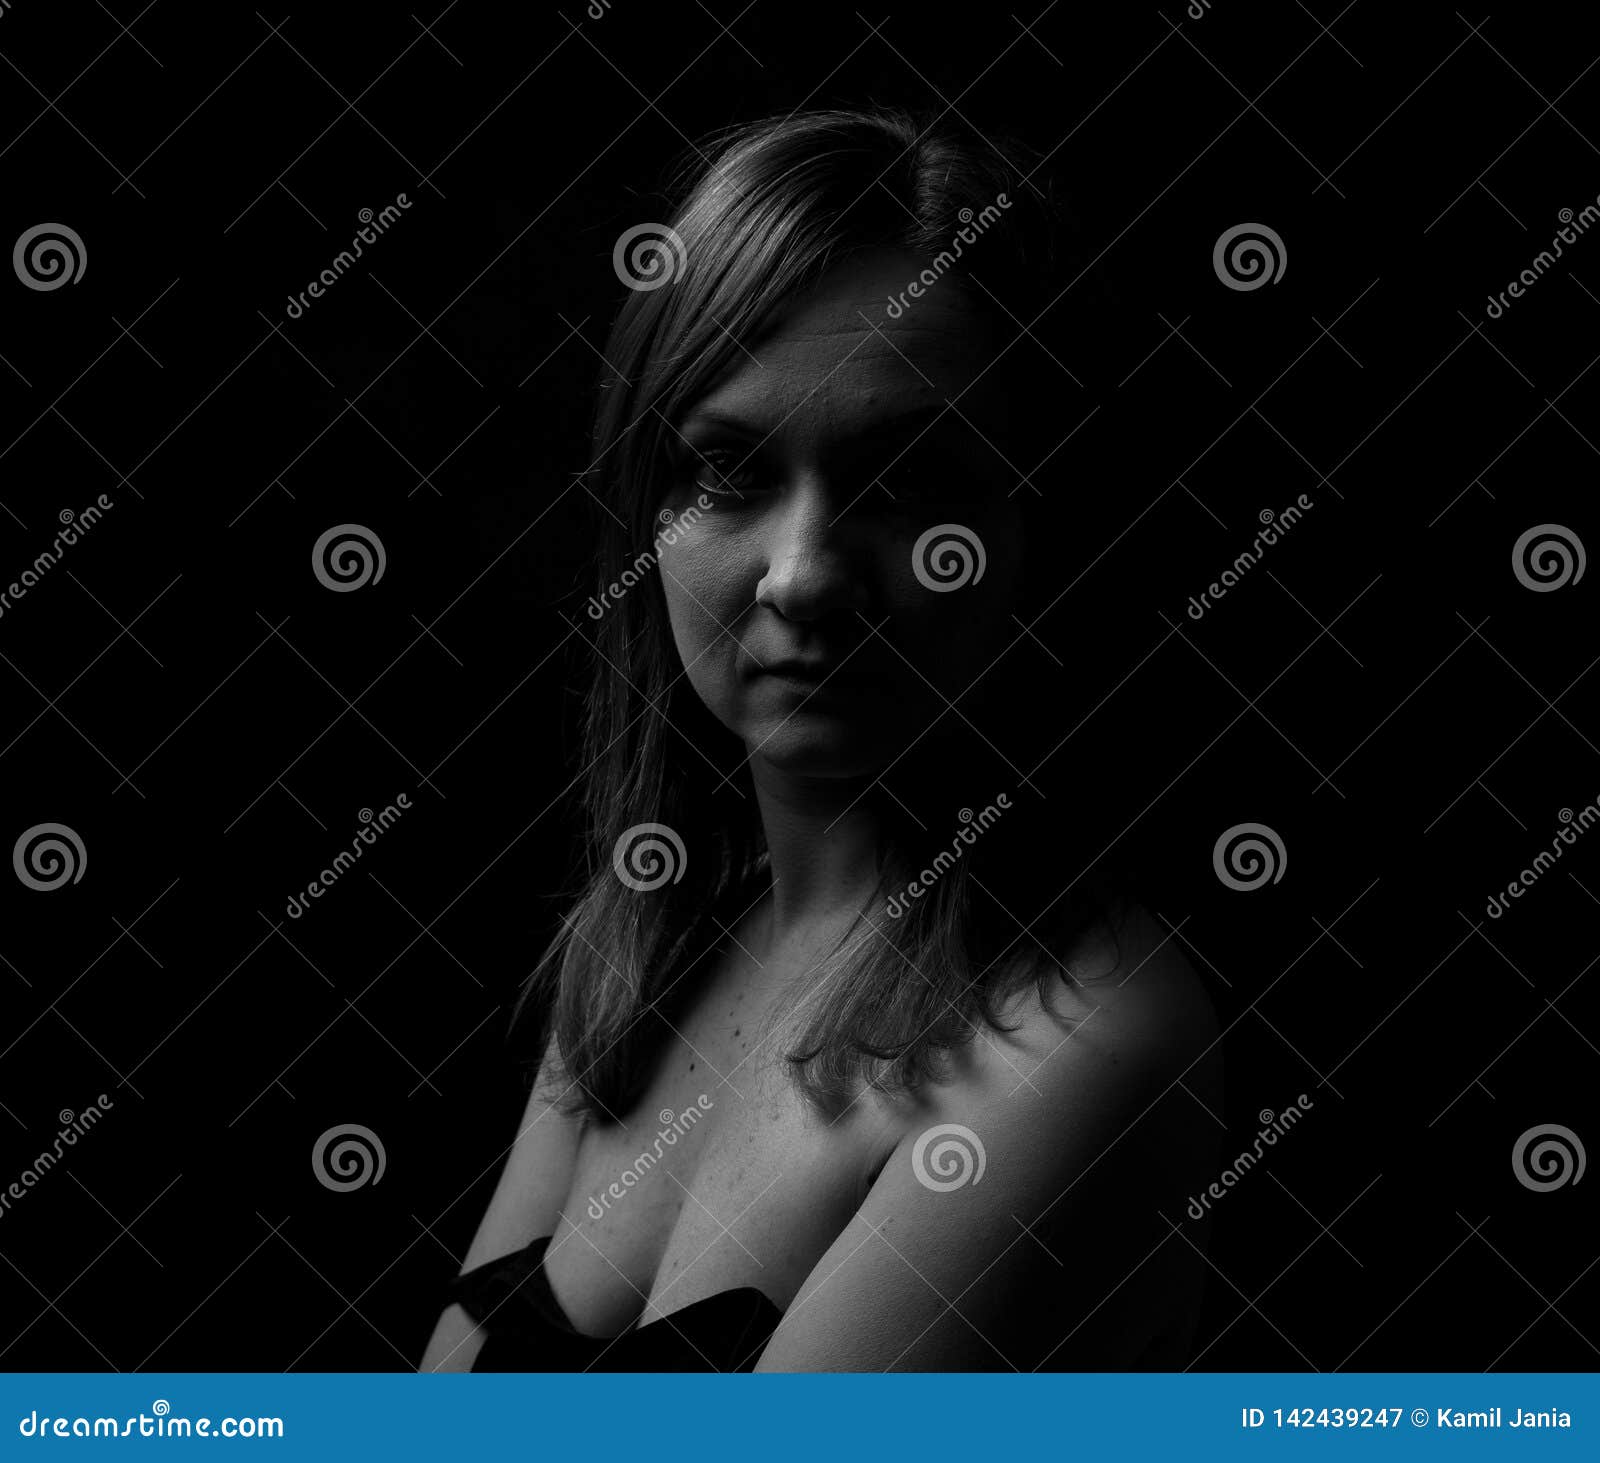 young woman showing expresion black & white 